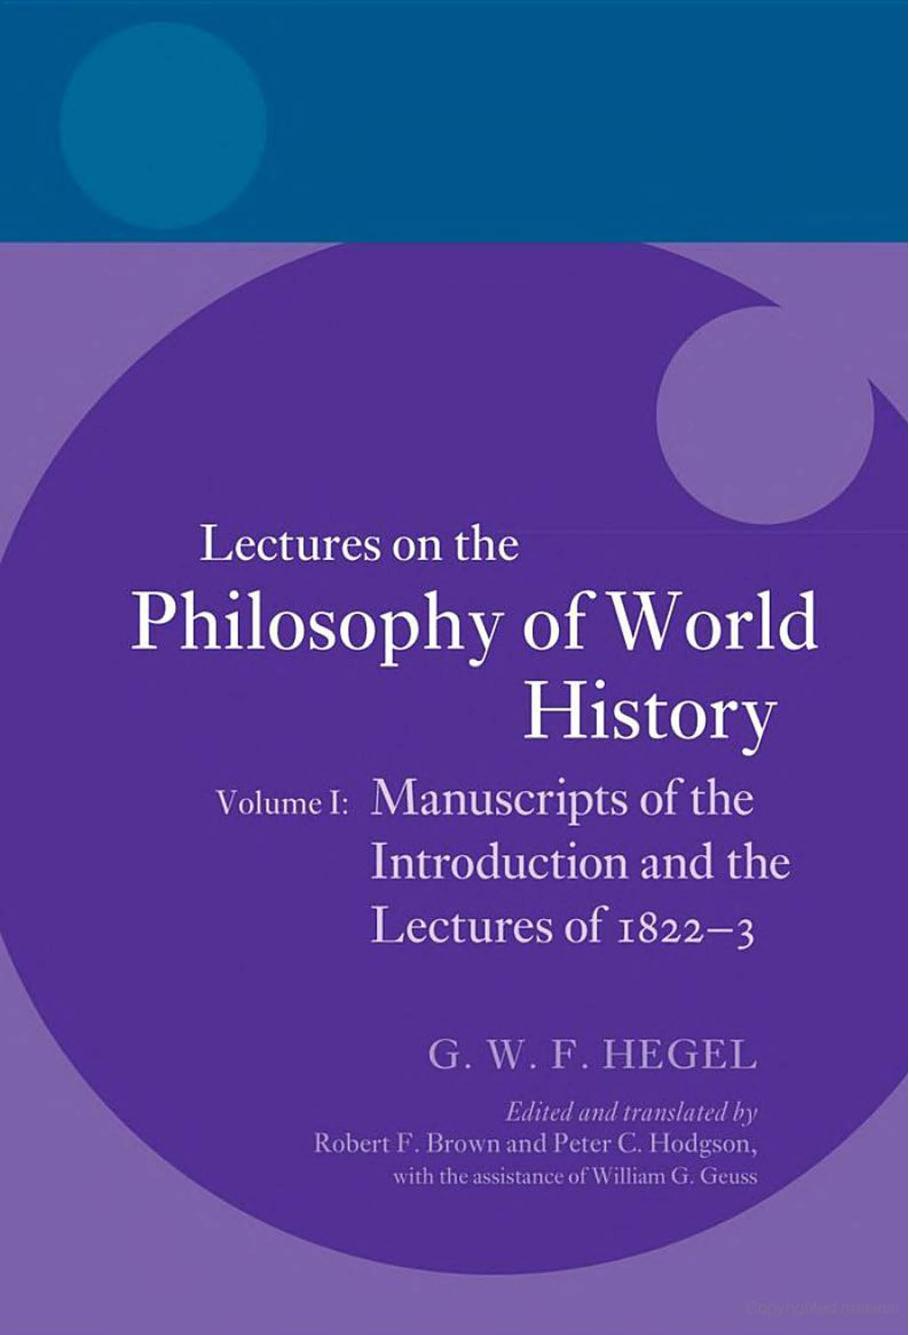 Hegel: Lectures on the Philosophy of World History, Volume I:Manuscripts of the Introduction and the Lectures of 1822-1823: Manuscripts of the Introduction and the Lectures of 1822-1823